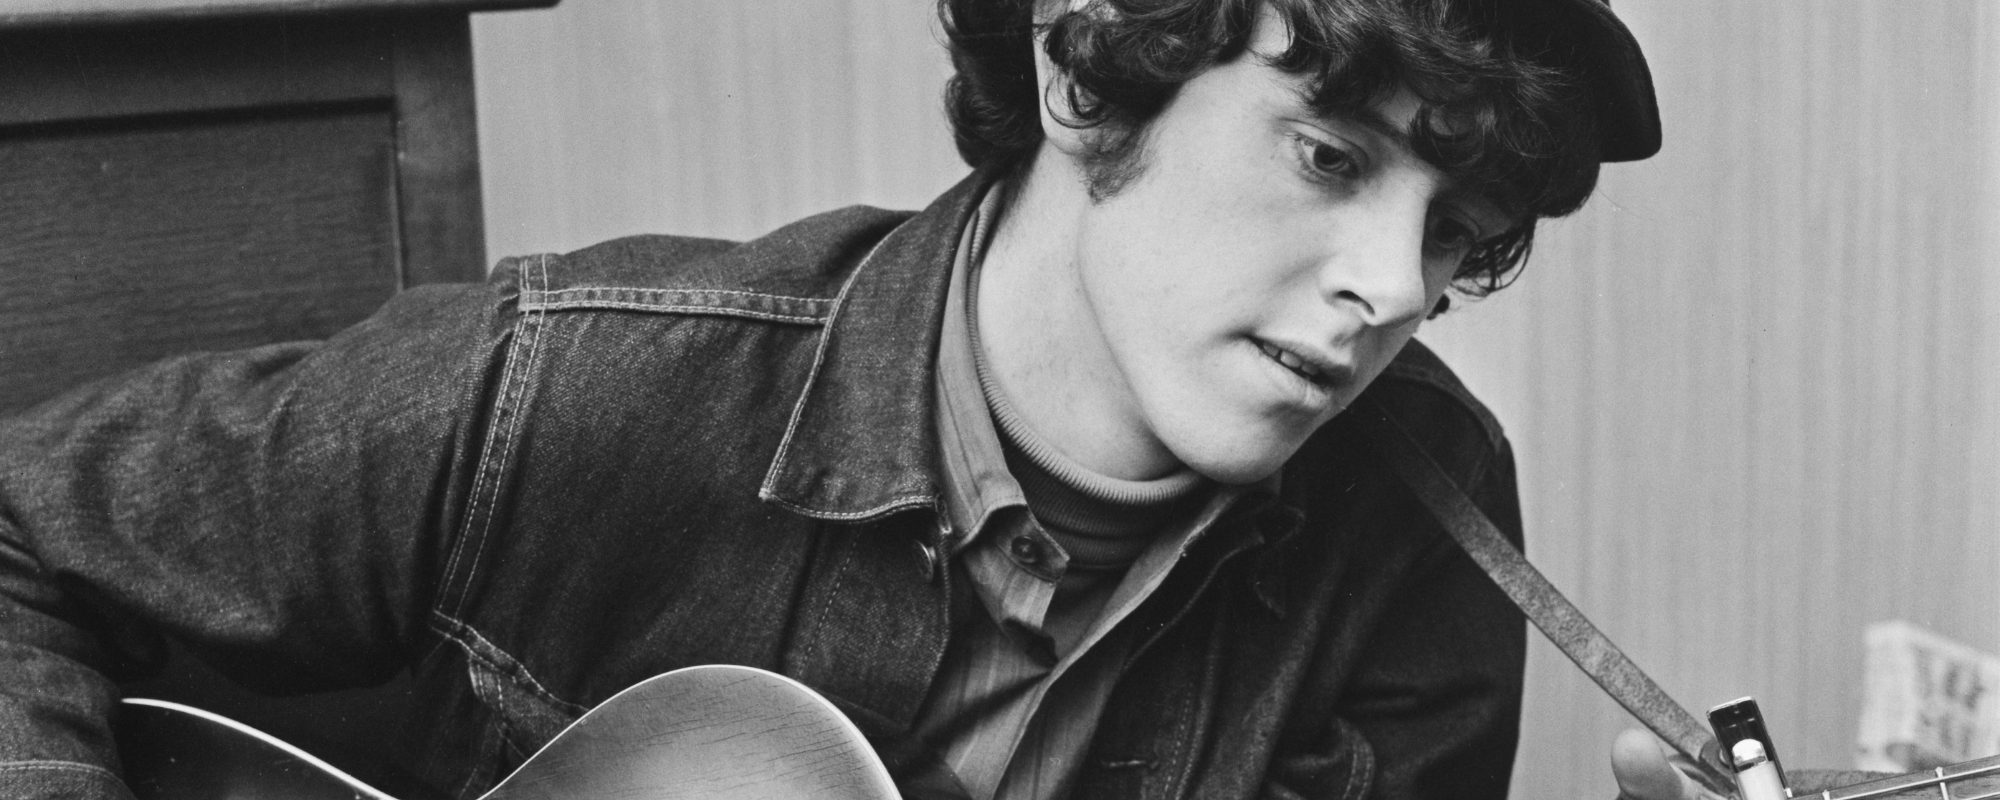 4 Essential Donovan Songs Beyond “Season of the Witch”